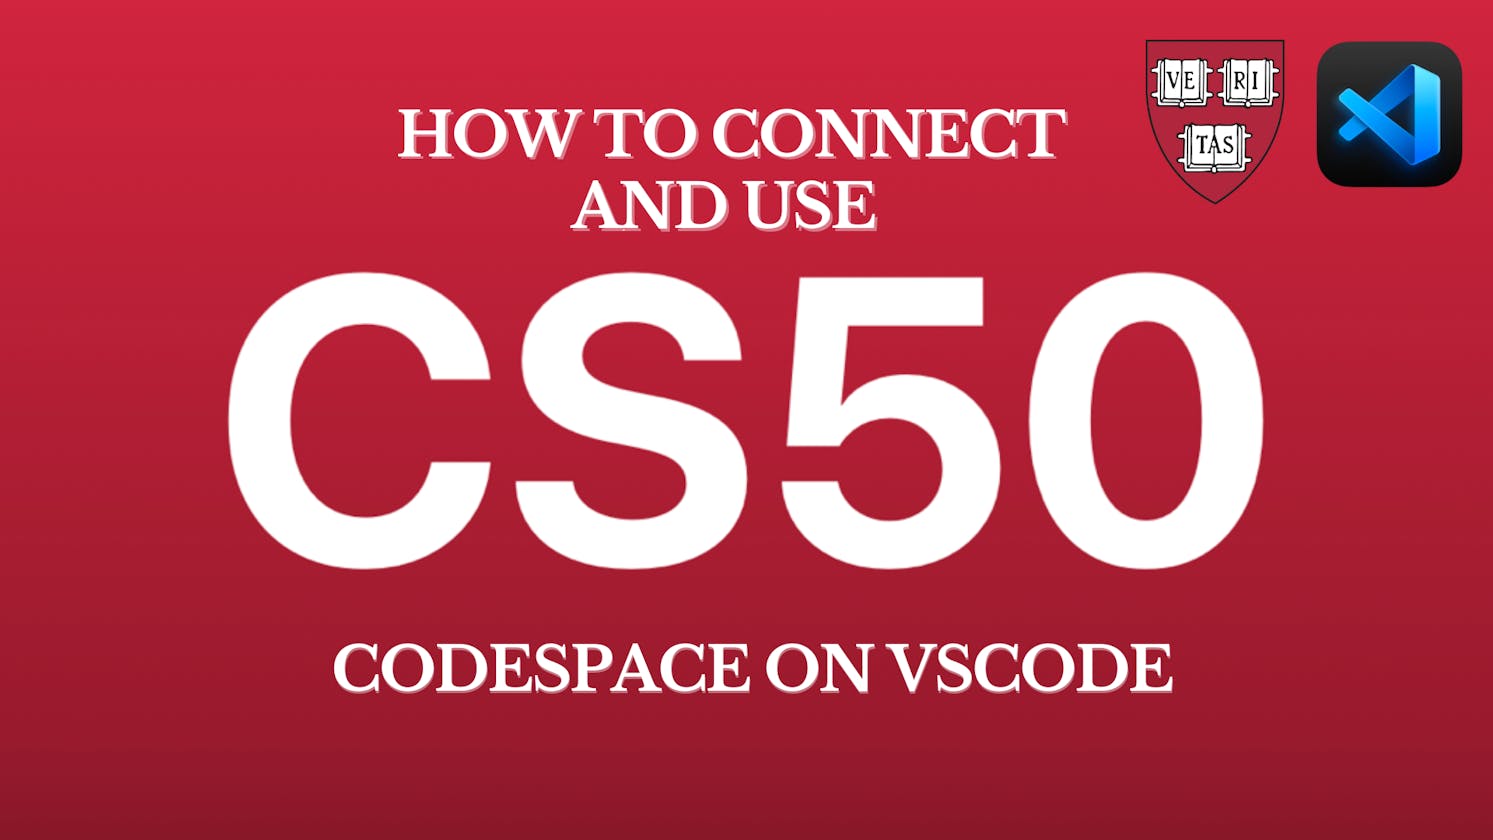 How To Connect And Use CS50 Codespace on VScode